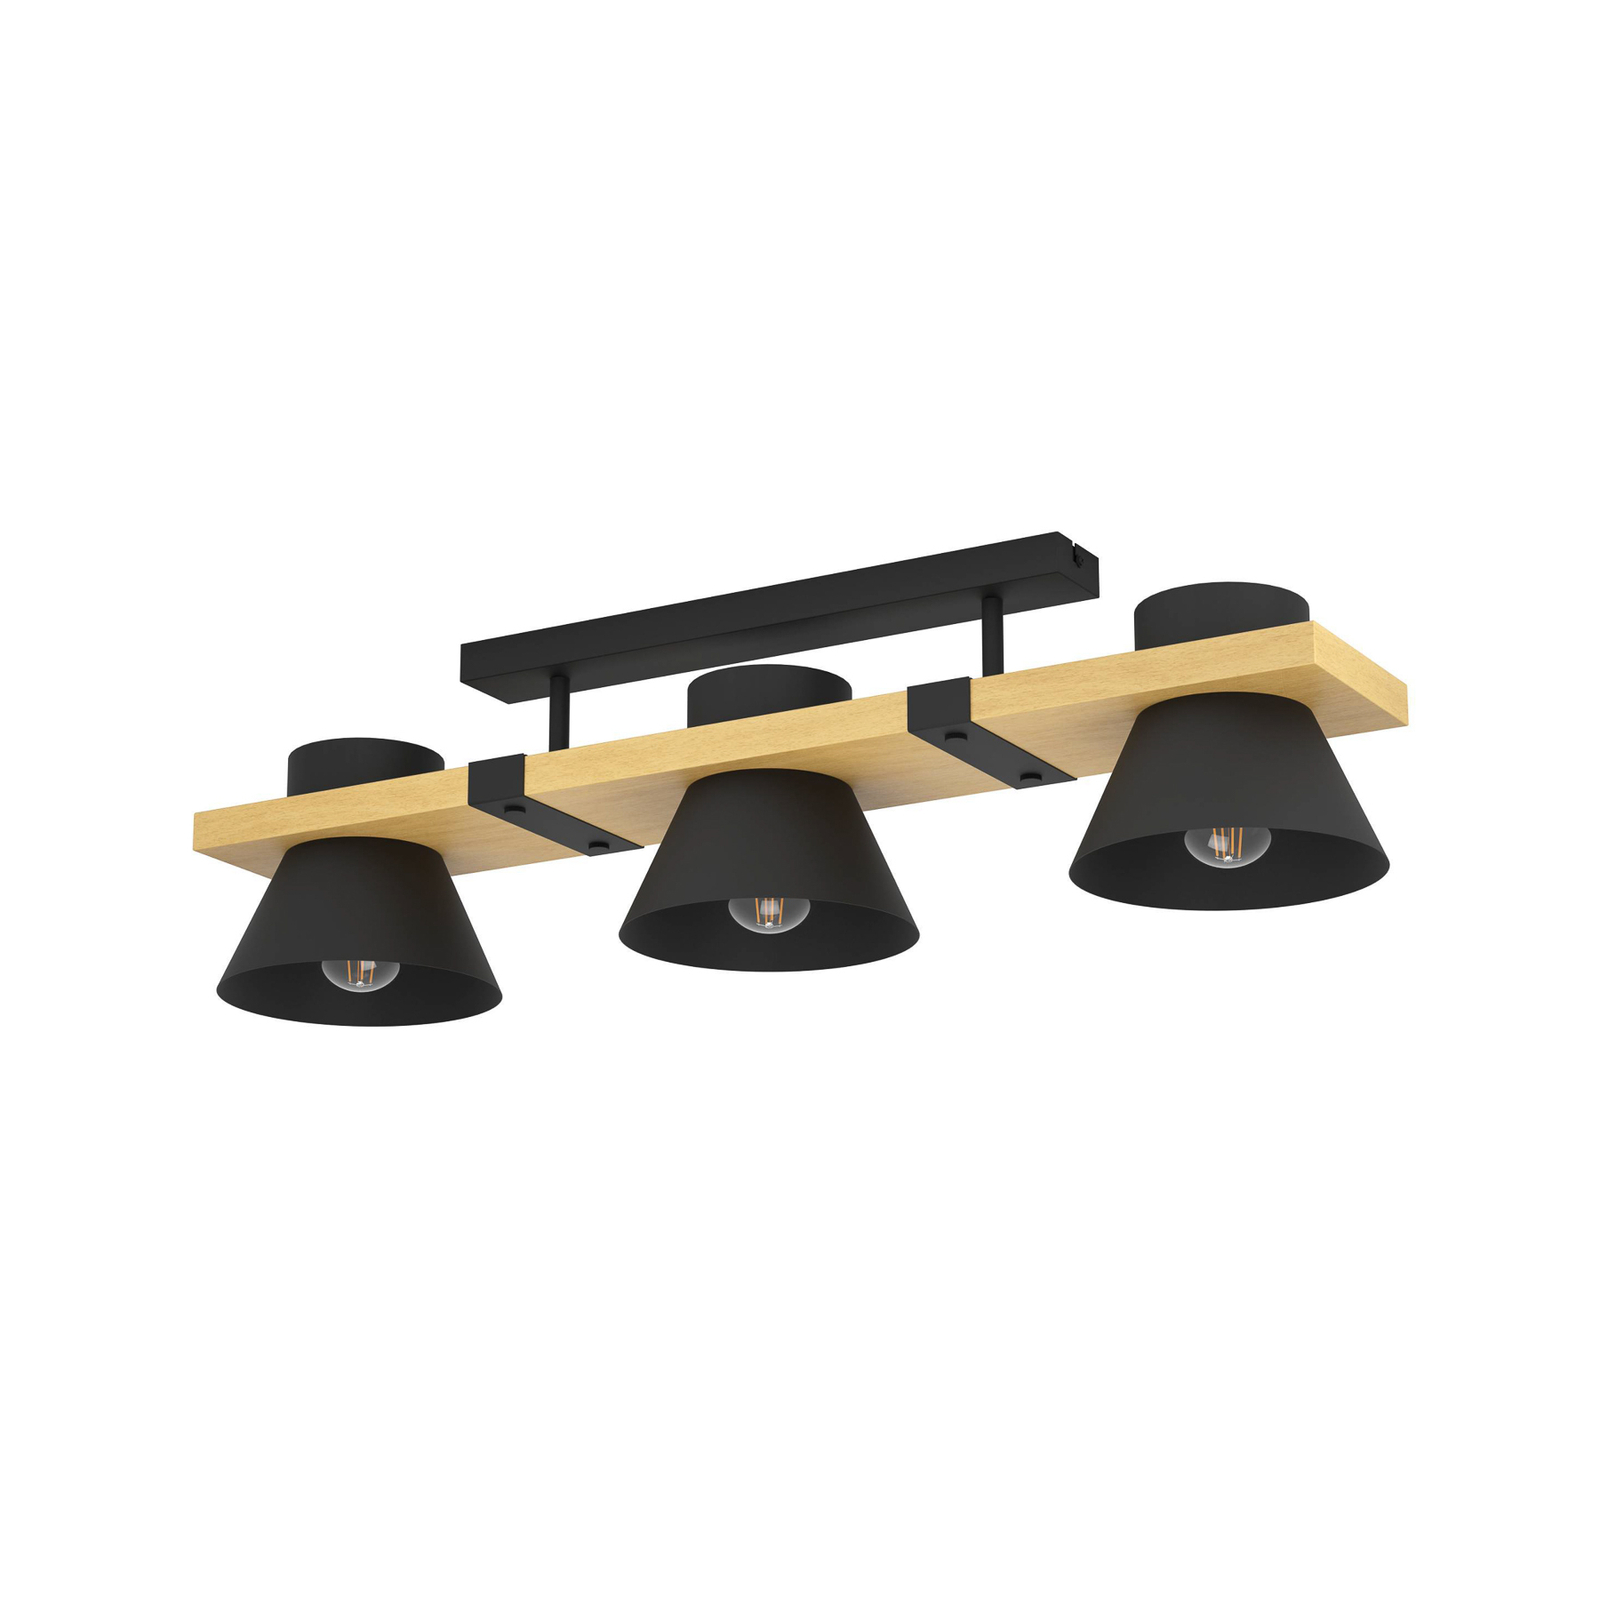 Maccles ceiling light in black with wood, 3-bulb